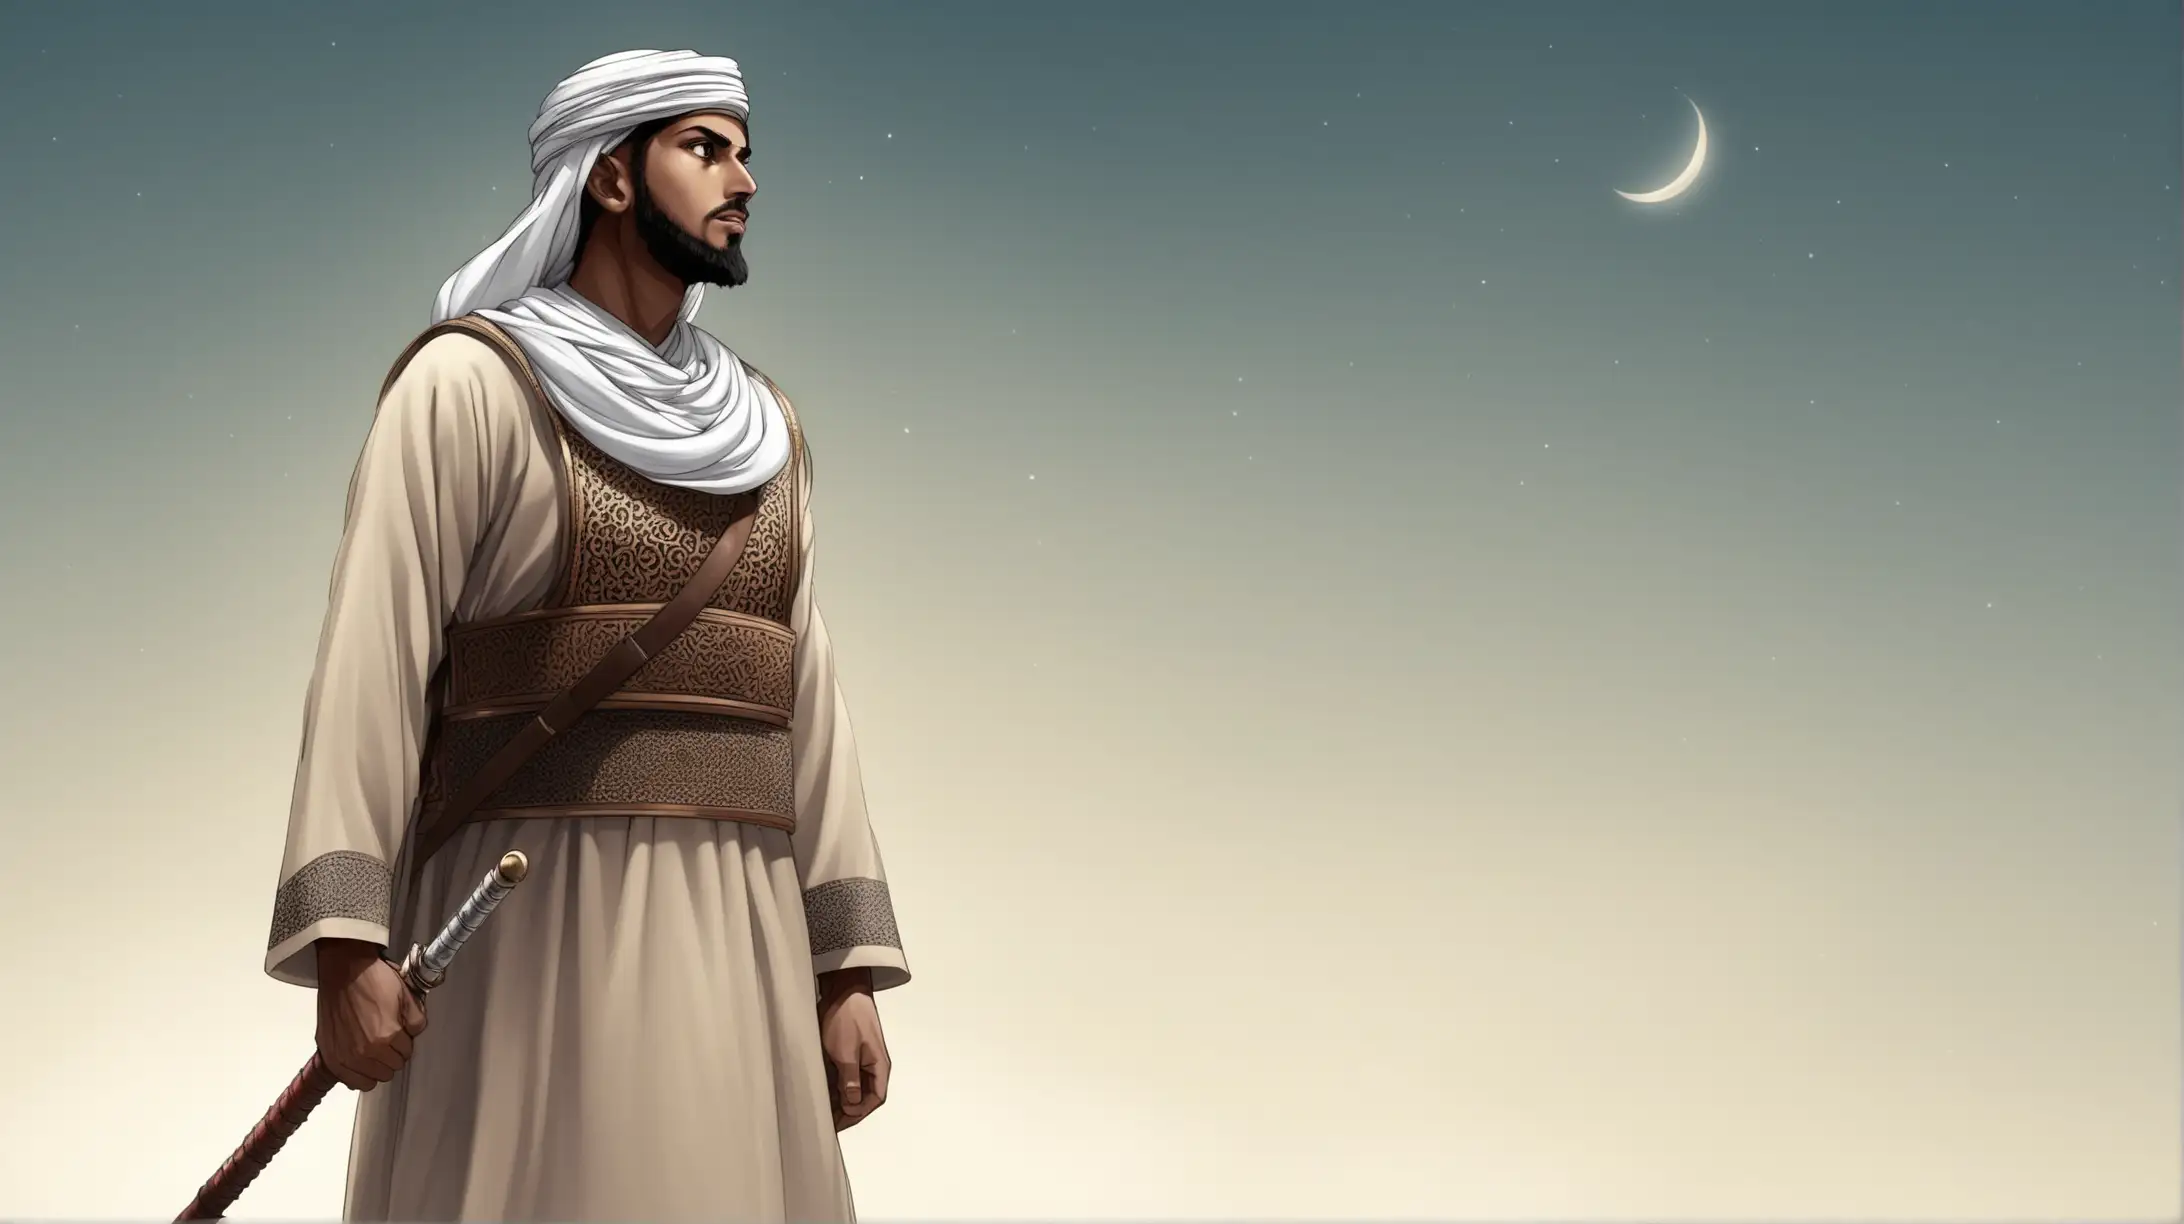 Muslim Warrior Standing Tall Gazing at the Sky